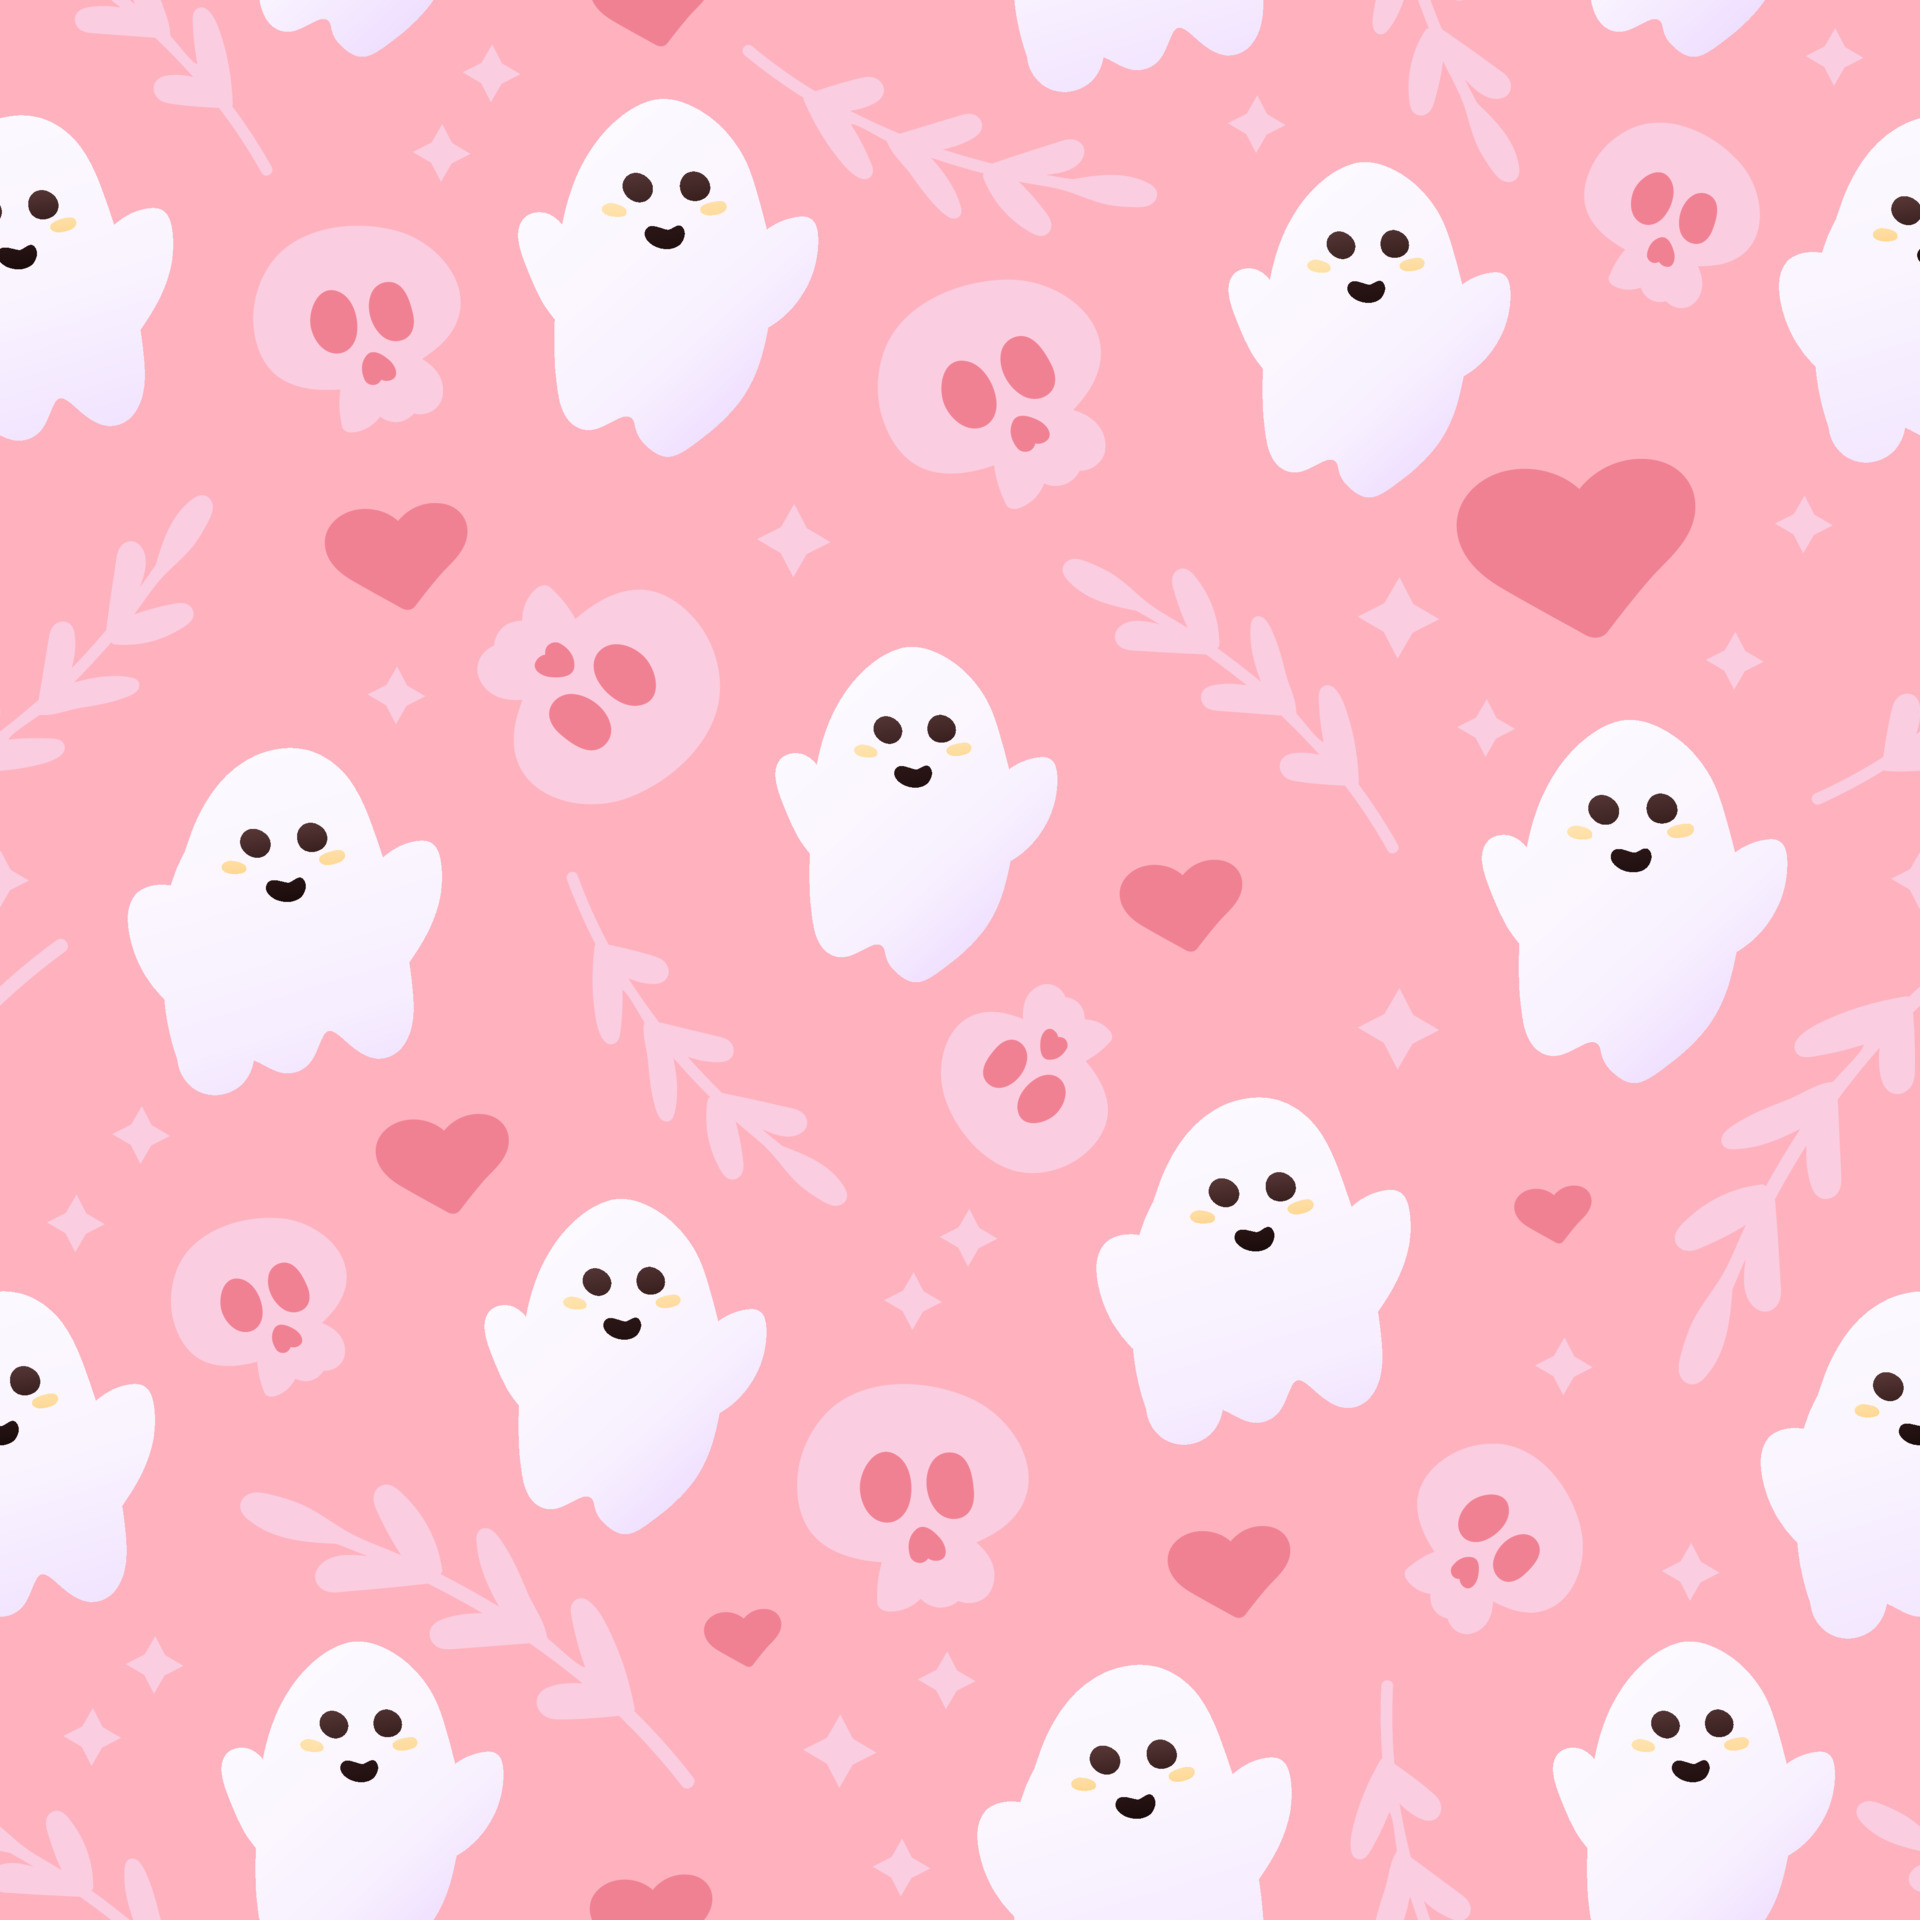 Spooky ghost cute background wallpapers for Halloween season